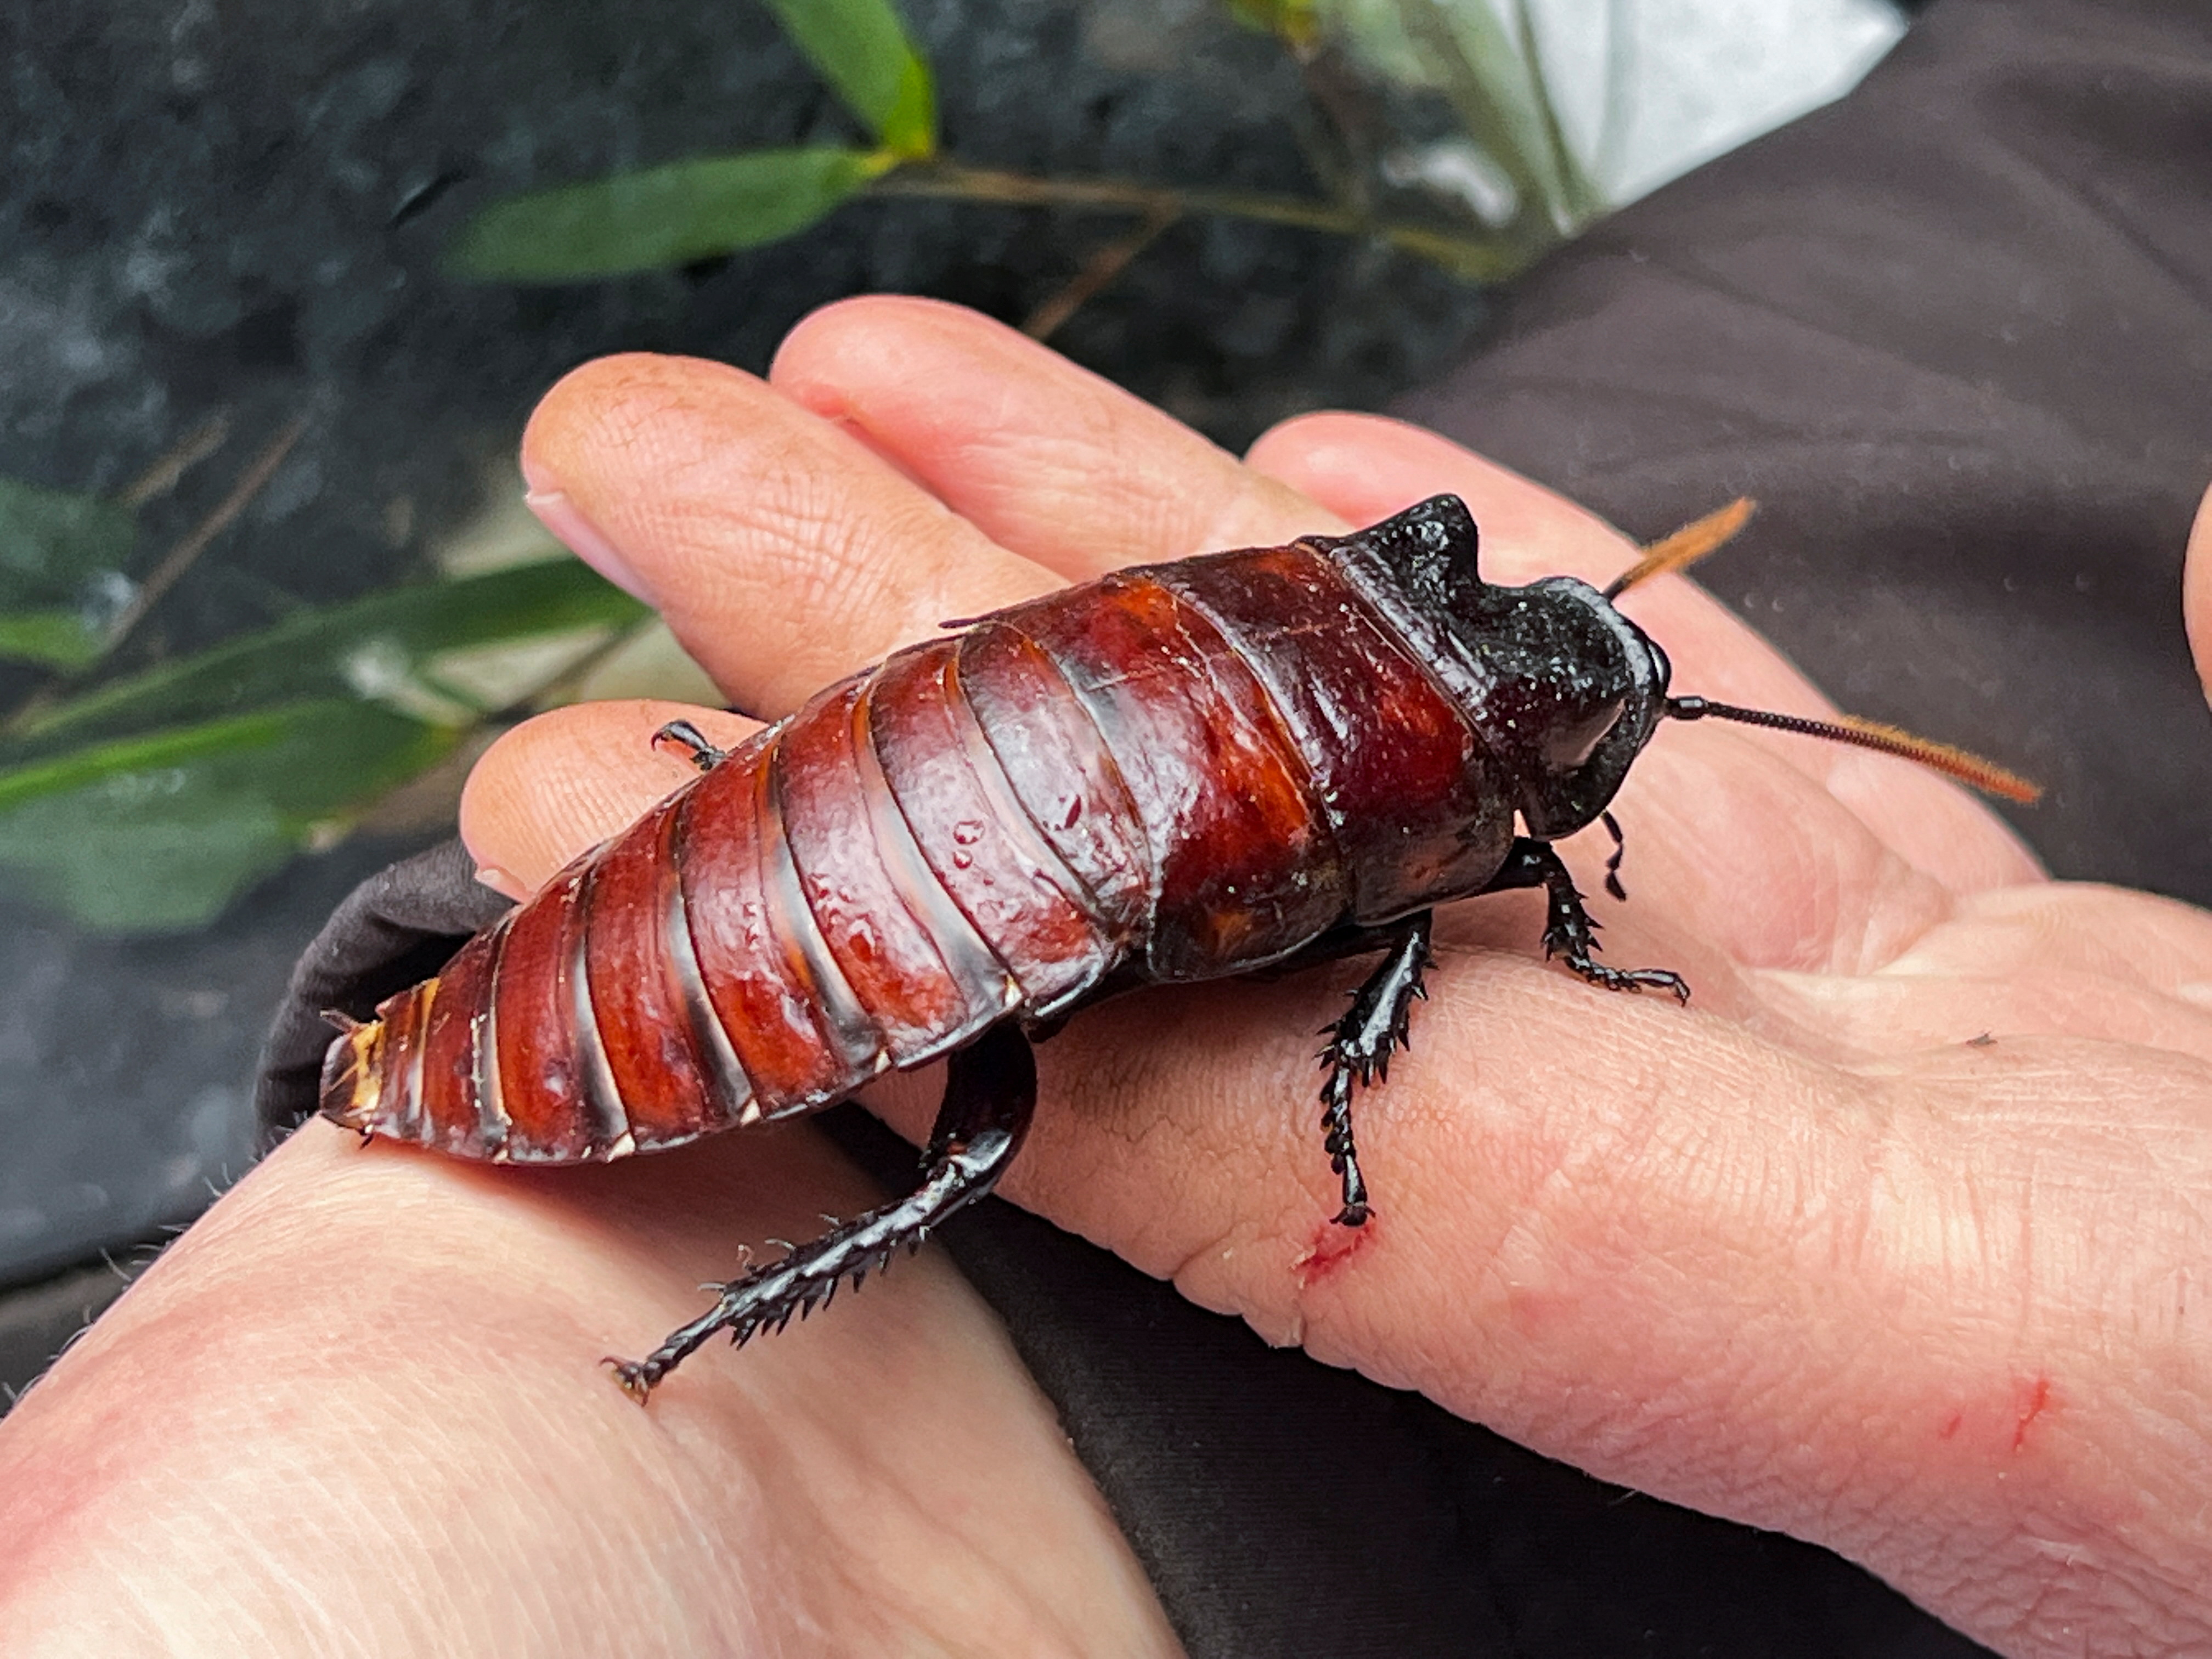 The Hemsley Conservation Centre is letting people name a cockroach after their ex for Valentine's Day, in Fairseat, Kent